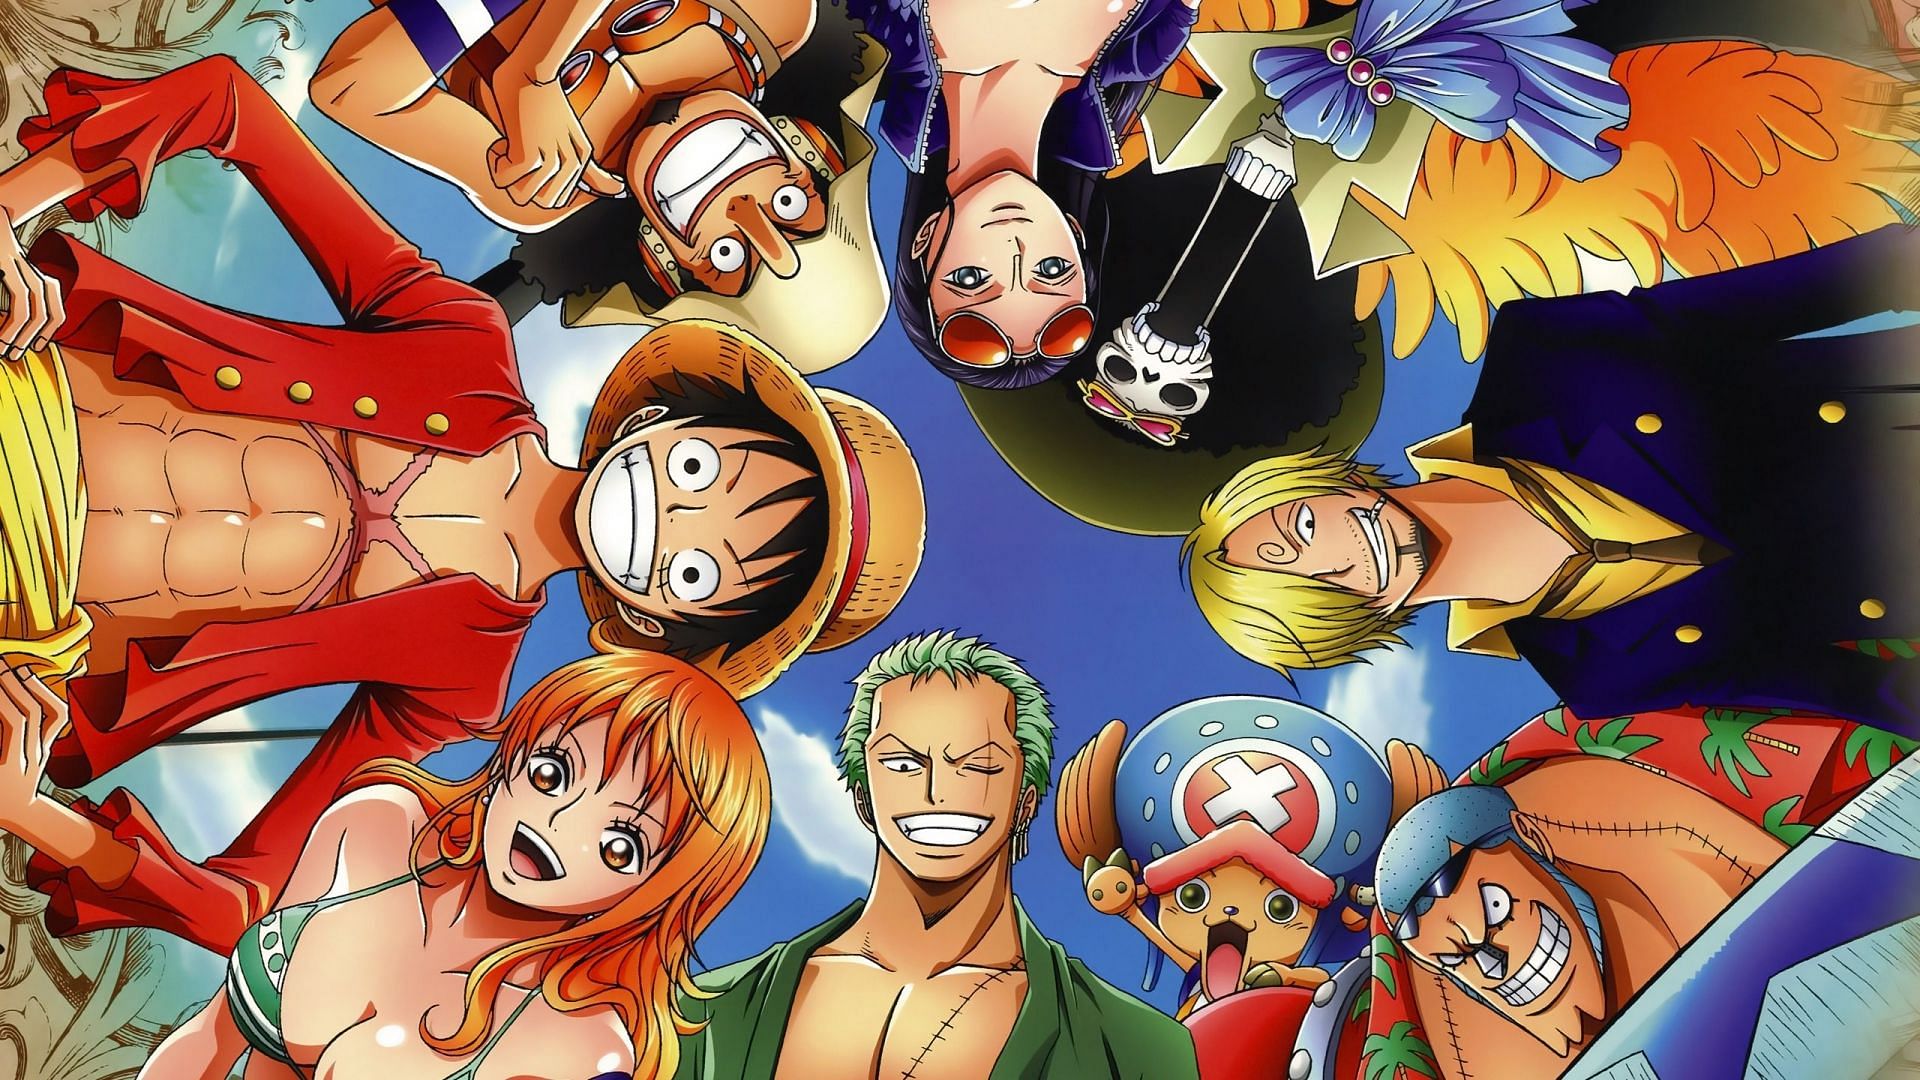 The Best One Piece Moments of All Time - IGN